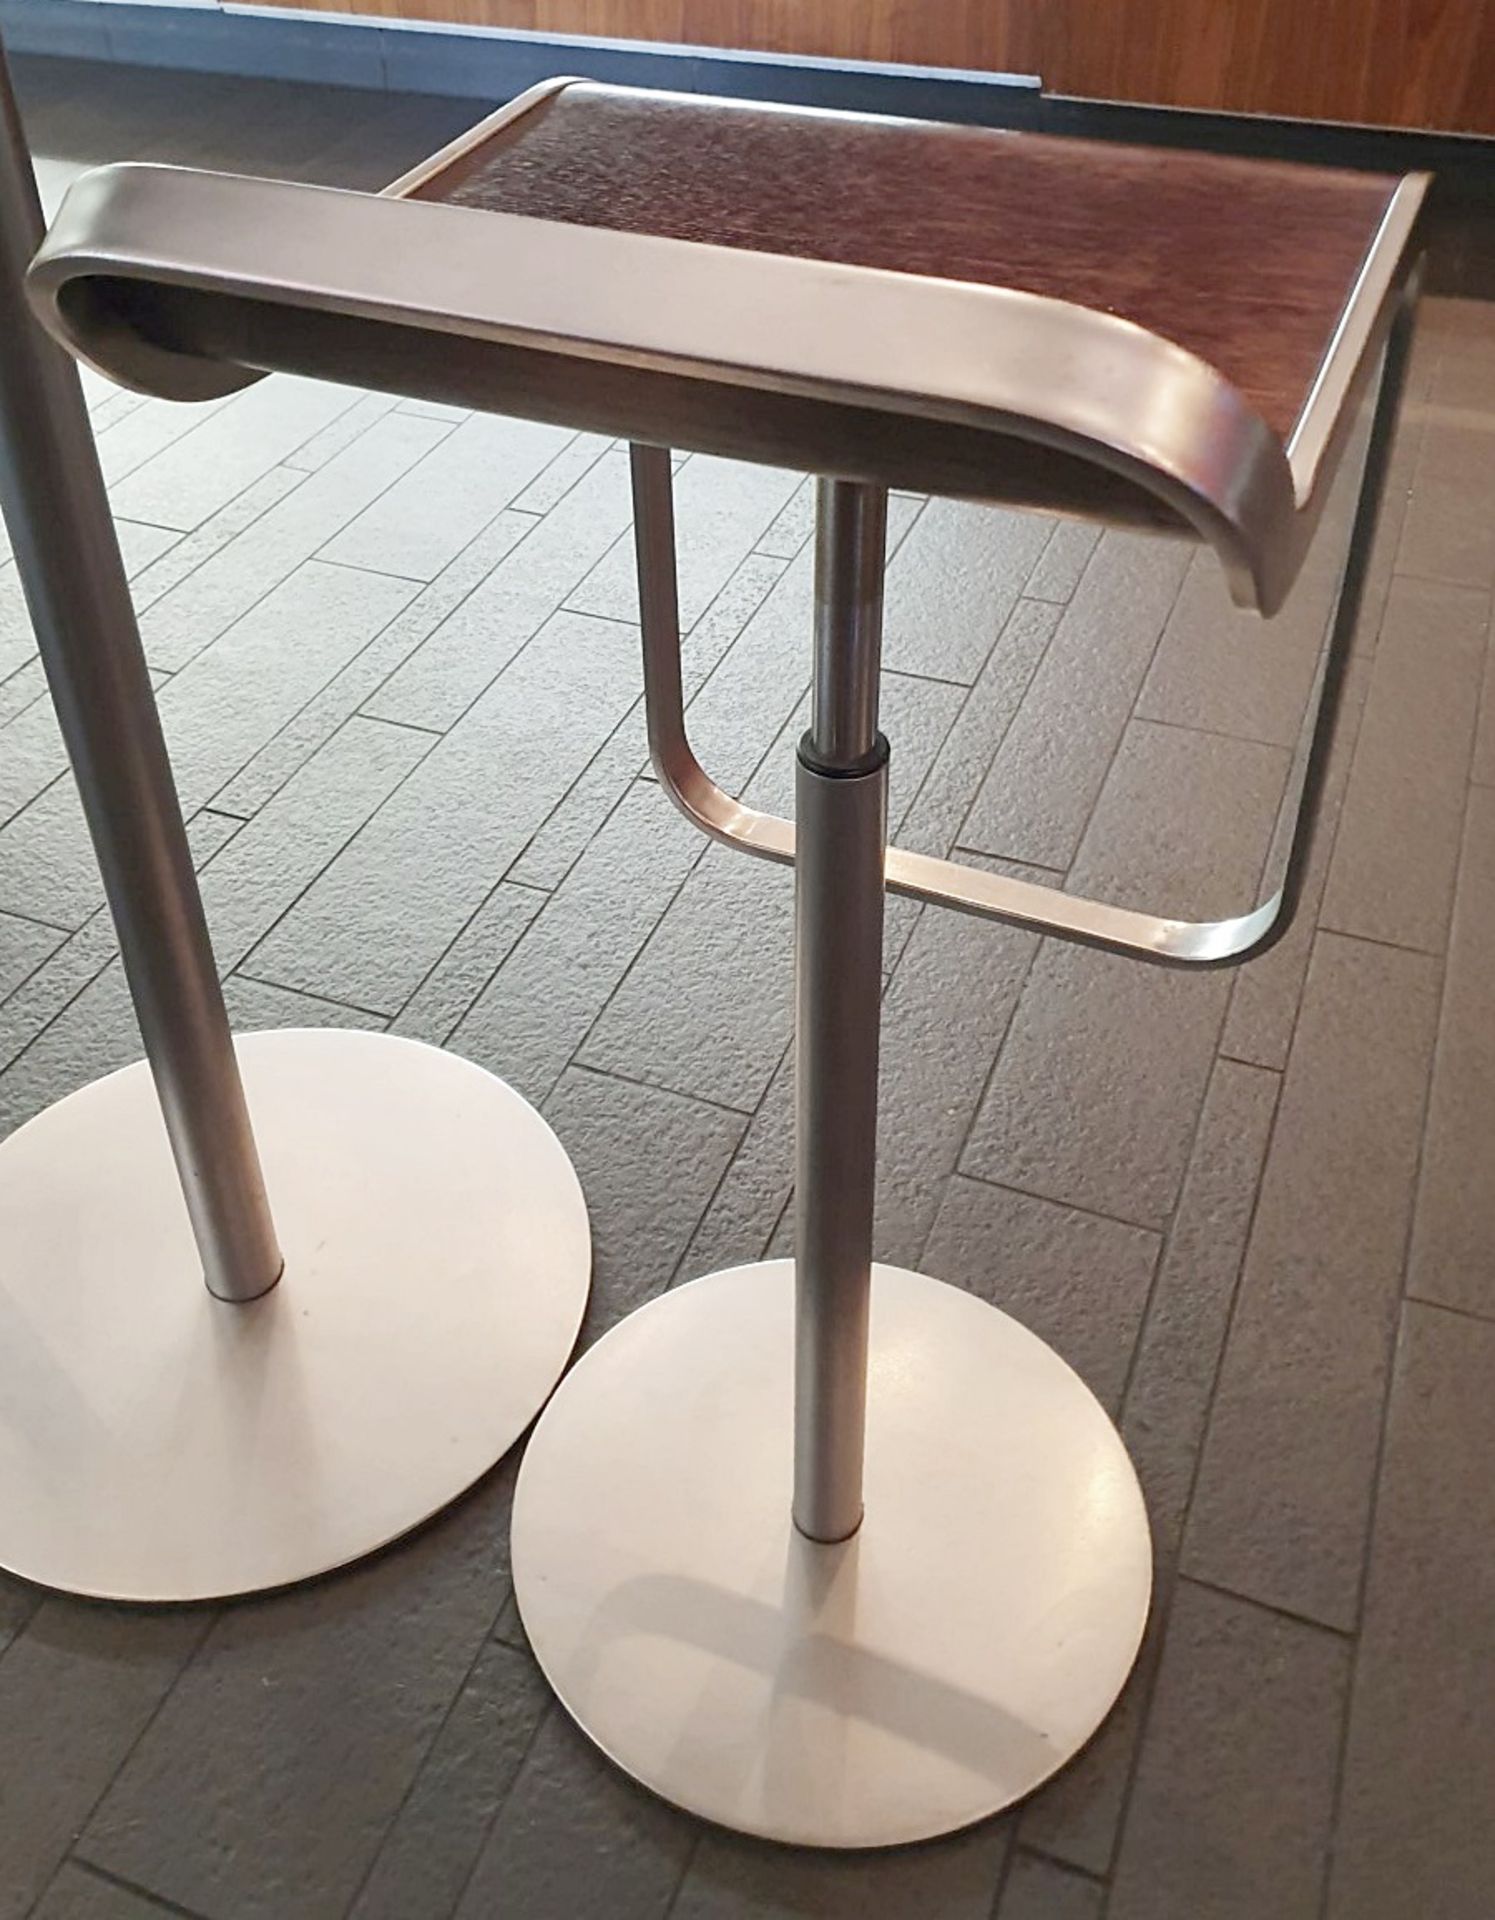 5 x Heavy Duty Commercial Bar Stools With Adjustable Hydraulic Aided Height - Dimensions: 35cm x - Image 8 of 8